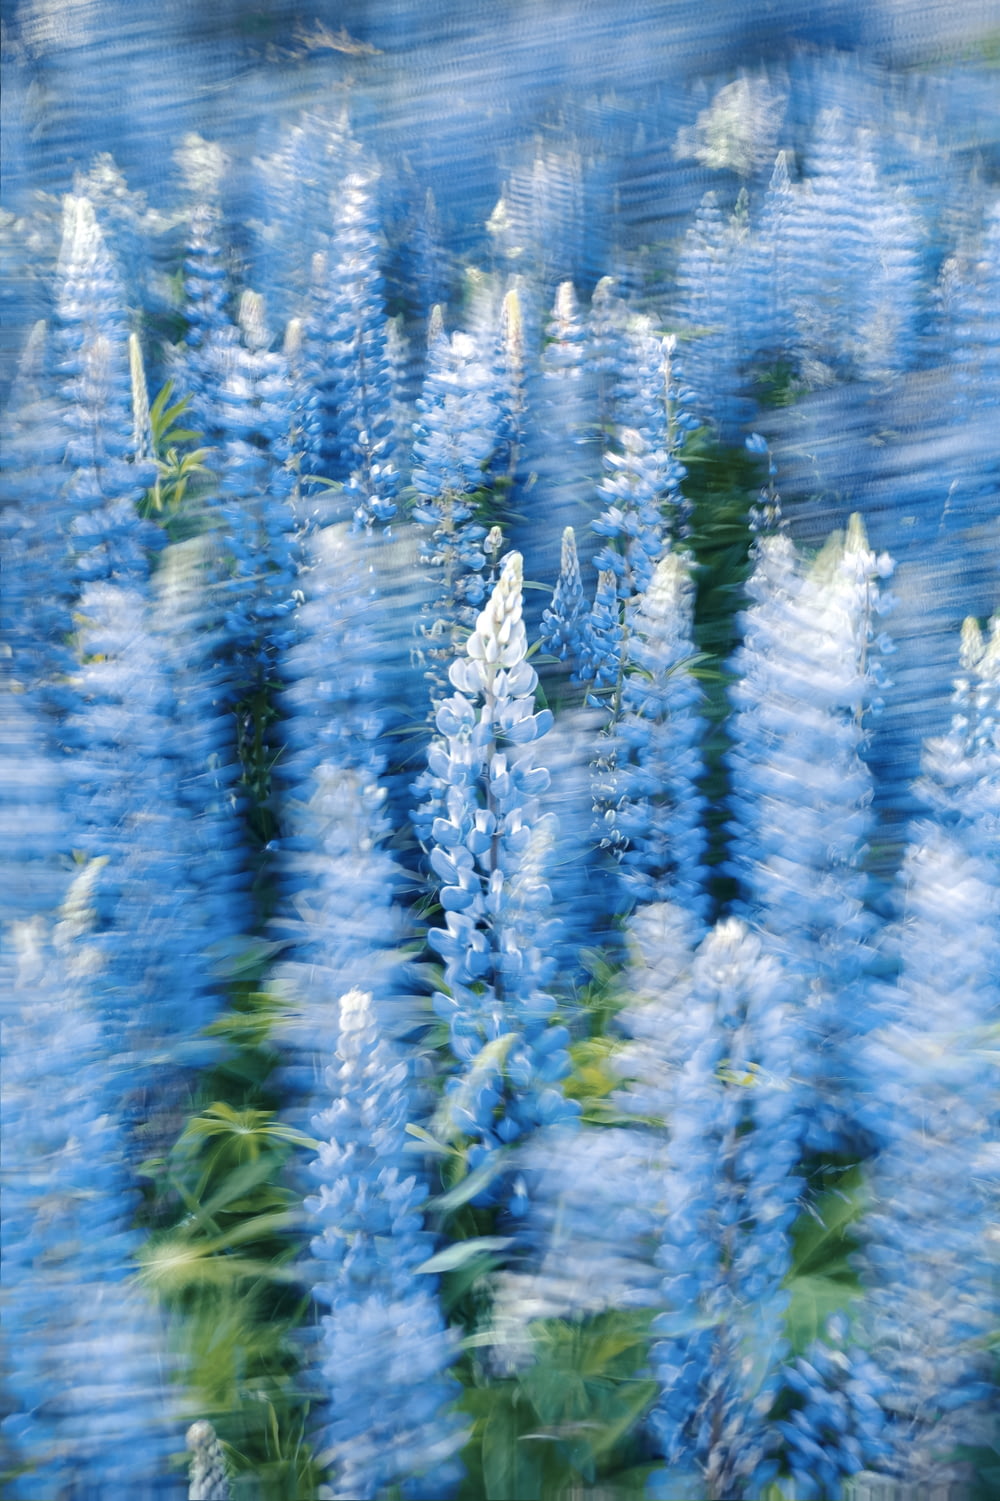 a blurry photo of a bunch of blue flowers